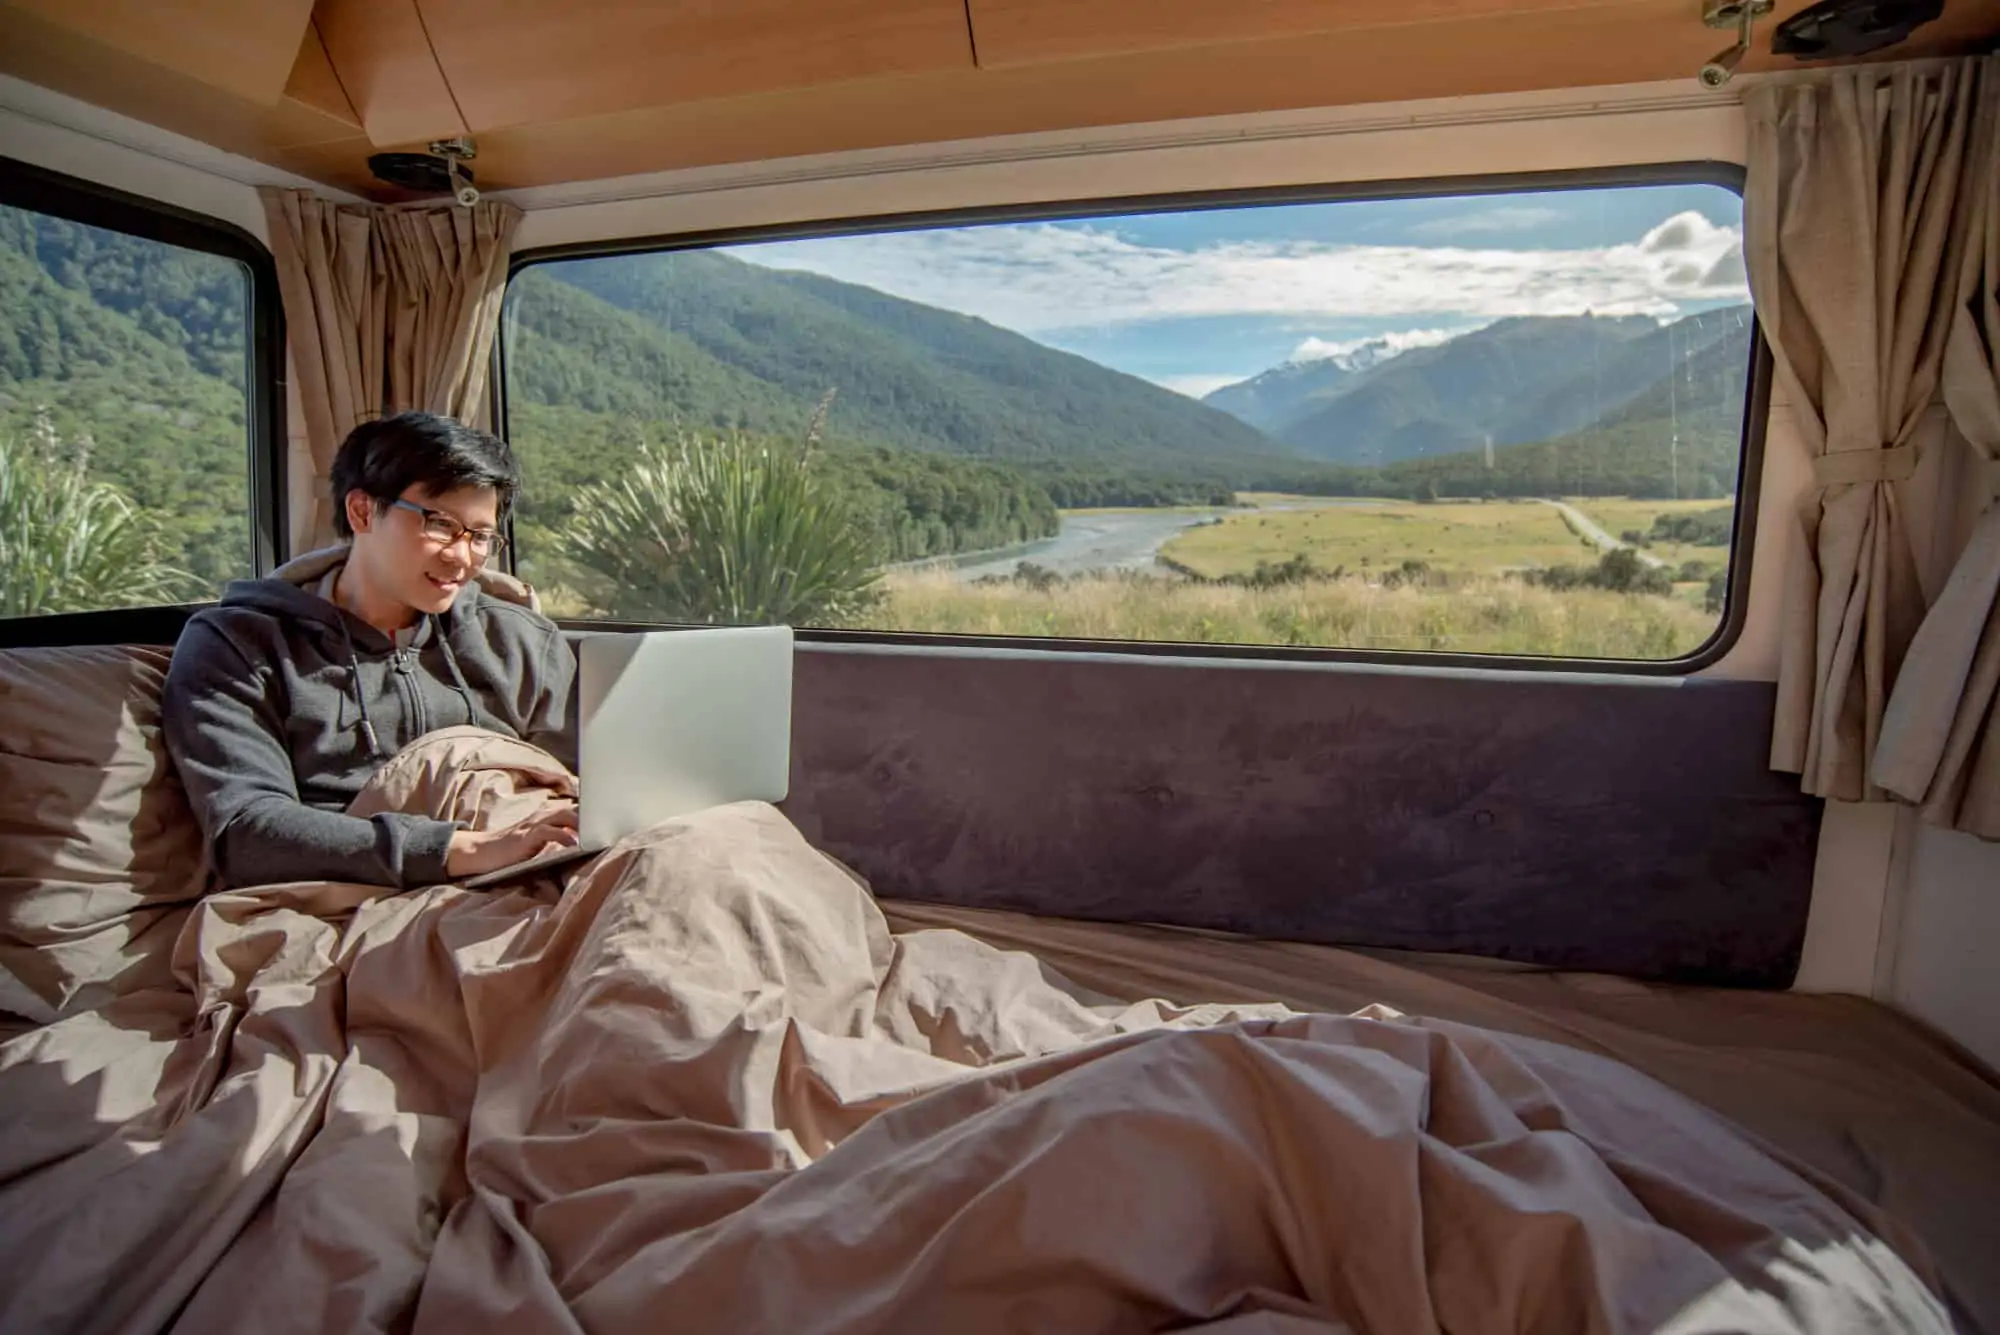 Young, male Asian digital nomad working with laptop computer on the bed with snow mountain scenic view through the window enjoying the RV lifestyle.